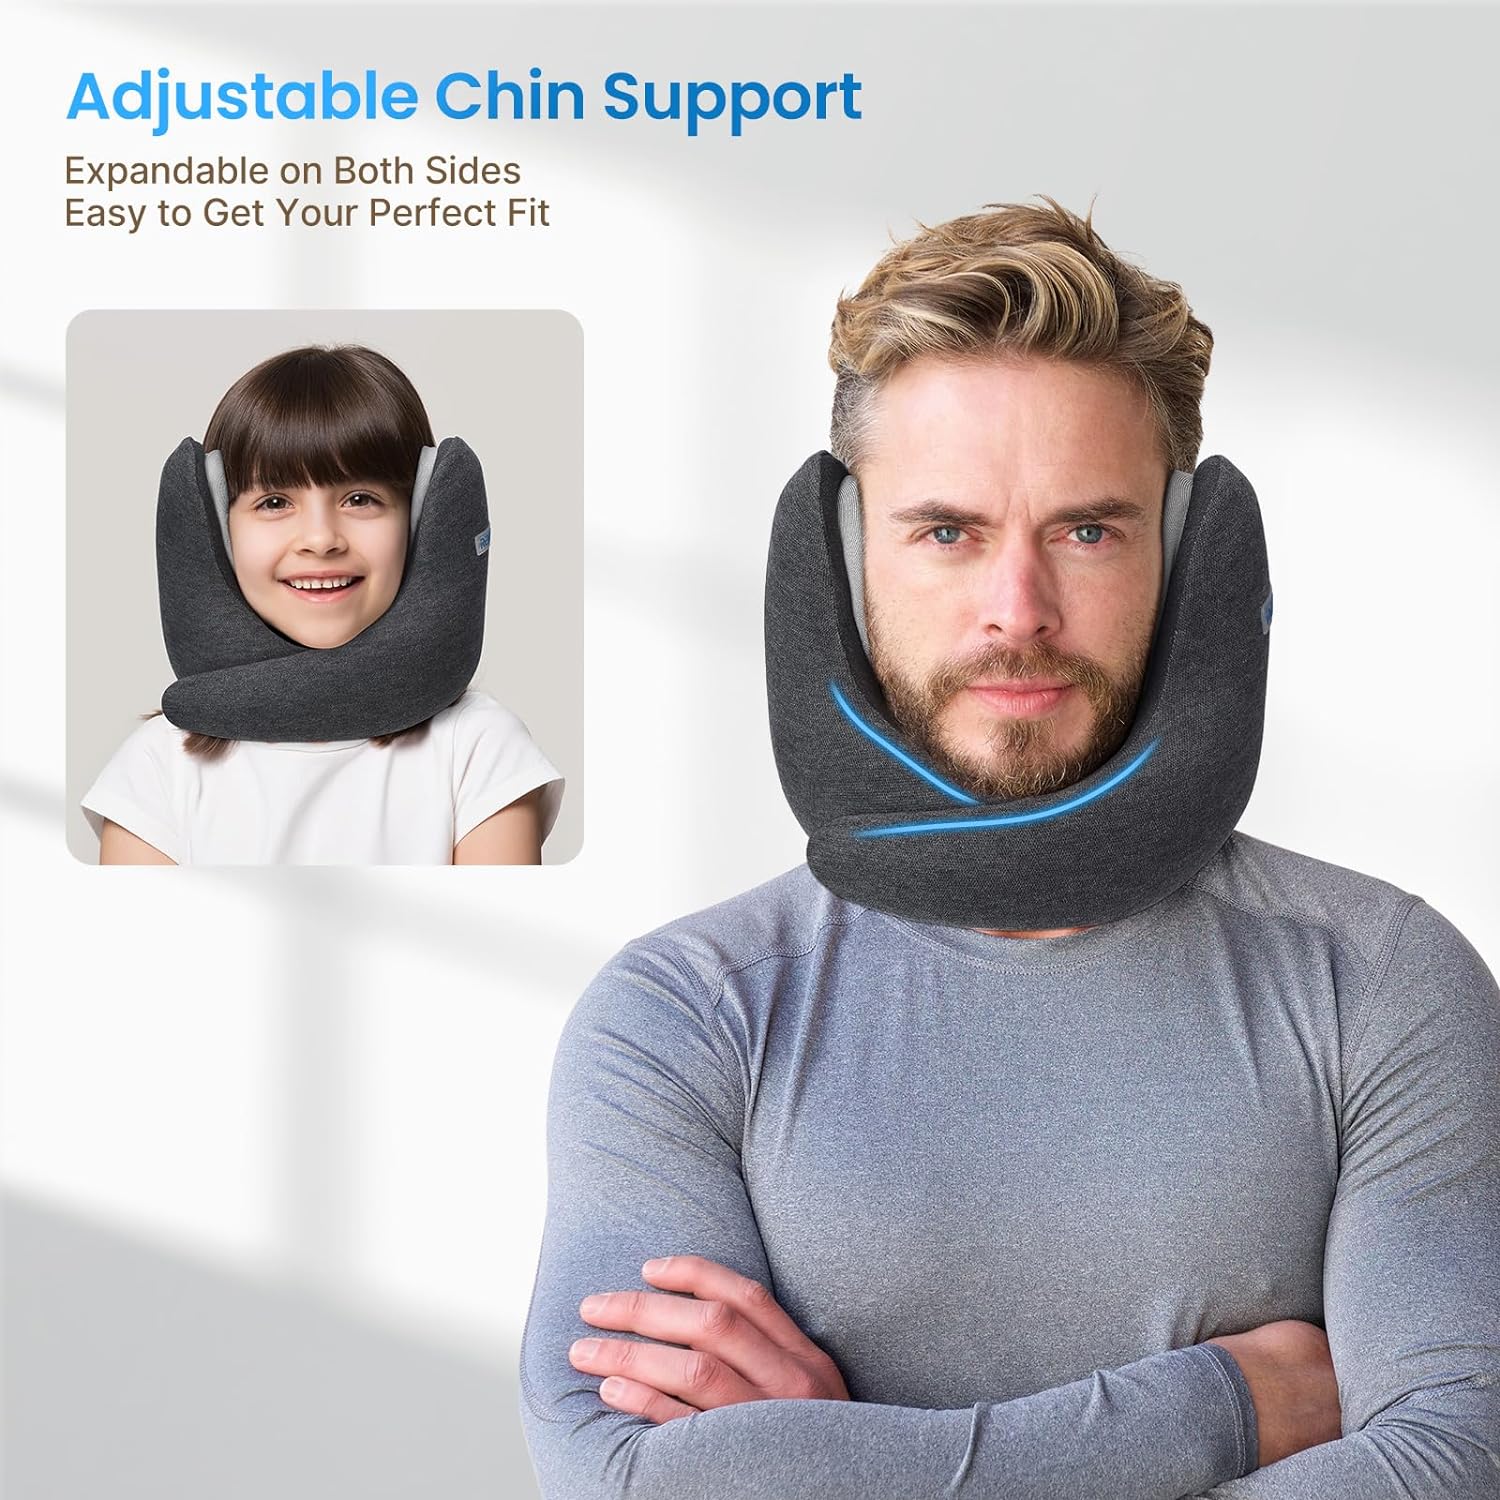 An advertisement image featuring a man and a girl modeling Renpho EU gray memory foam neck pillows with adjustable chin support. The man, with folded arms, appears on the right whereas the girl, smiling, is shown on the left.